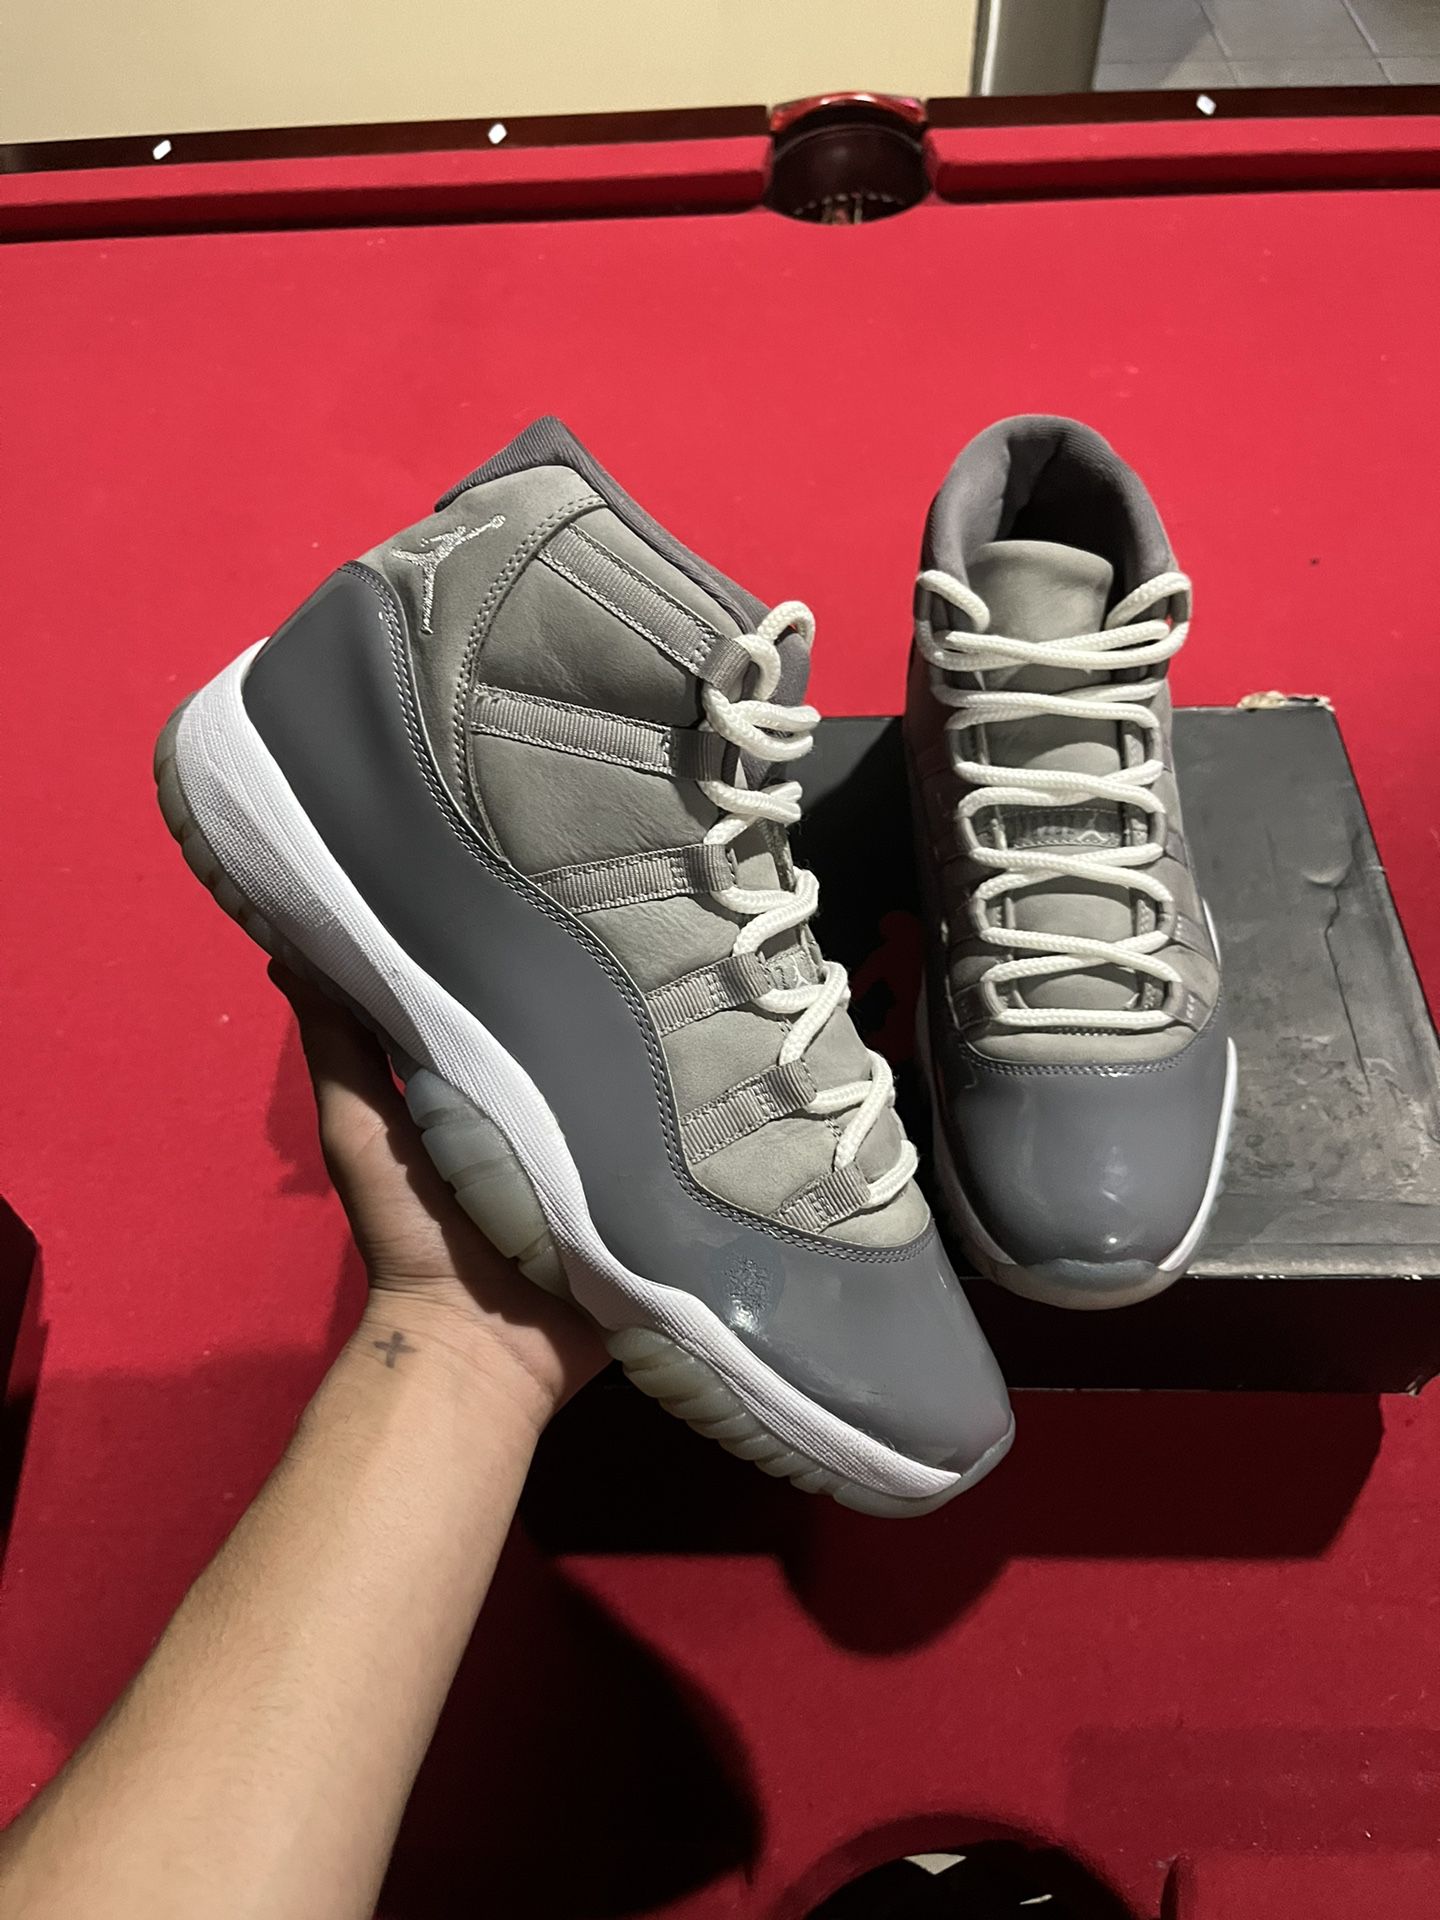 Jordan 11 Cool Grey for Sale in Bensenville, IL - OfferUp